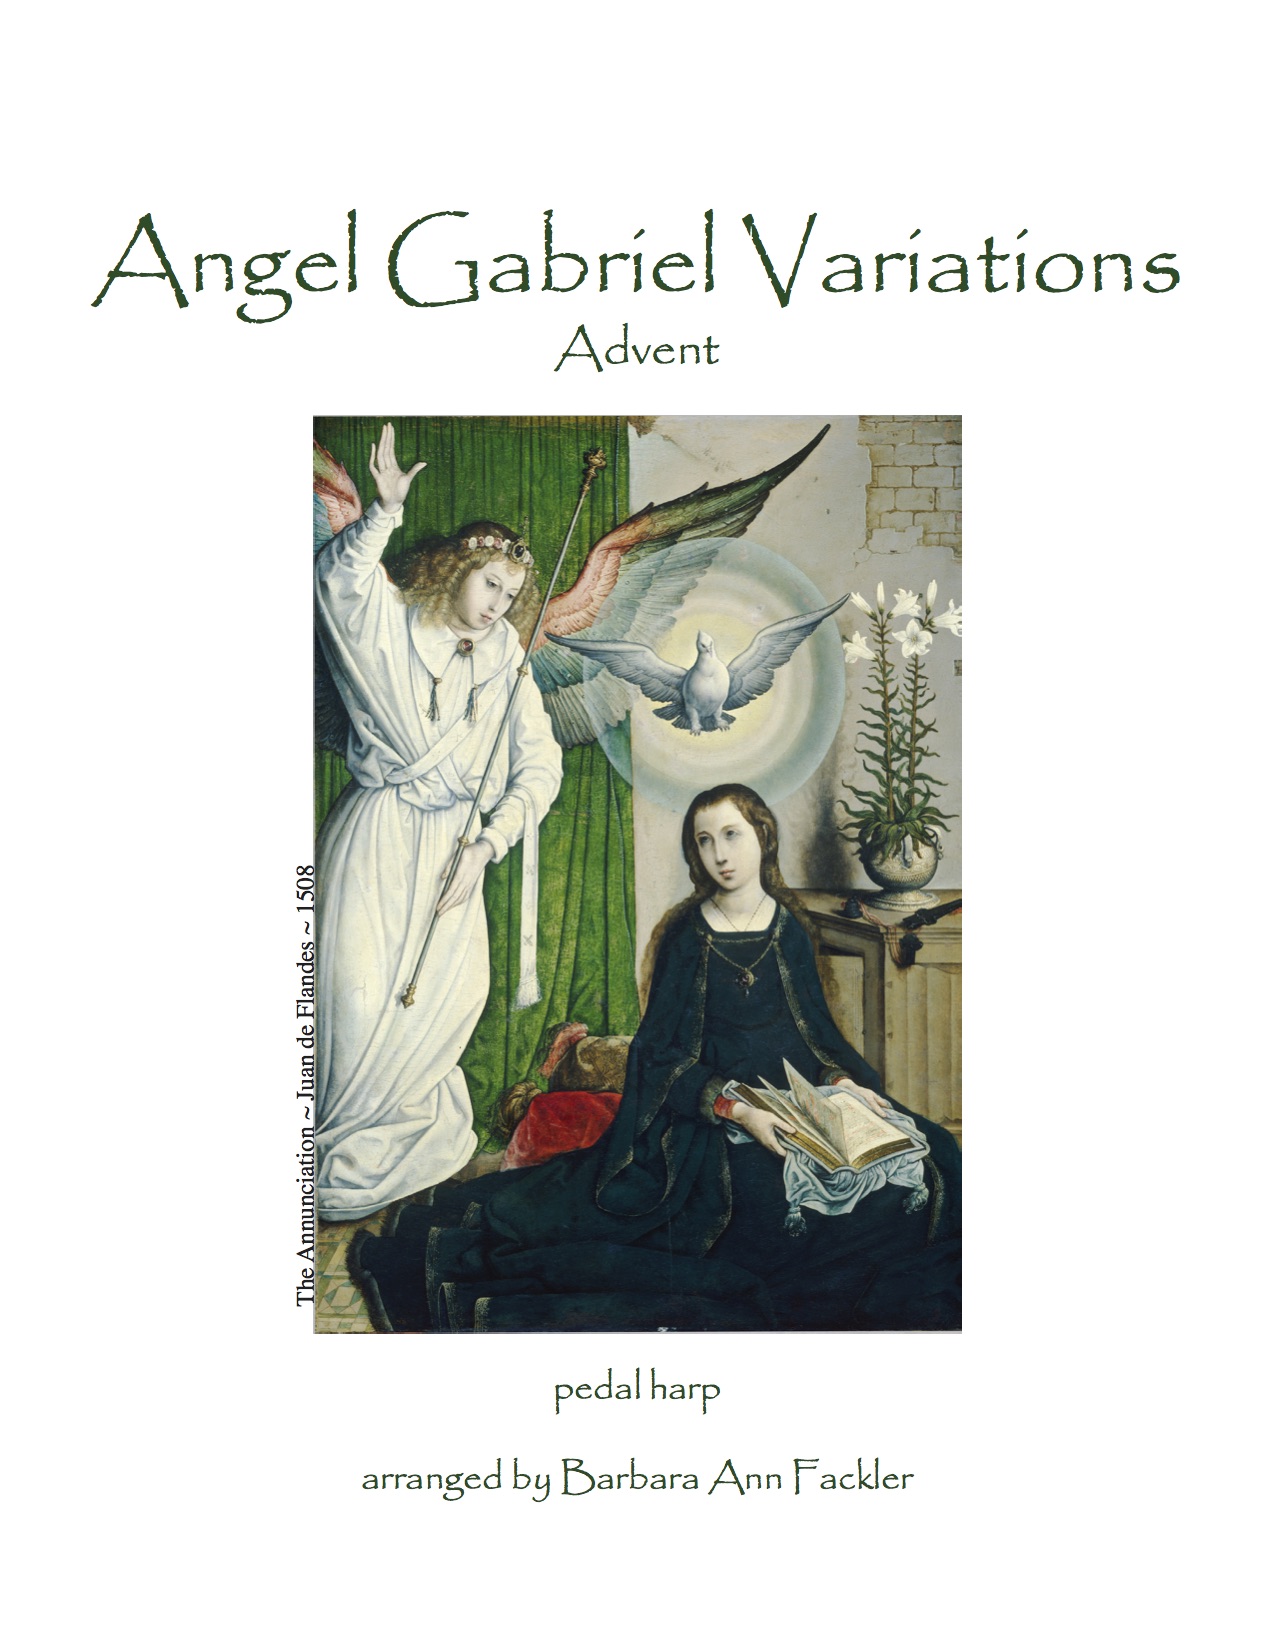 Advent solo for pedal harp ~ Angel Gabriel Variations, sheet music by Barbara Ann Fackler